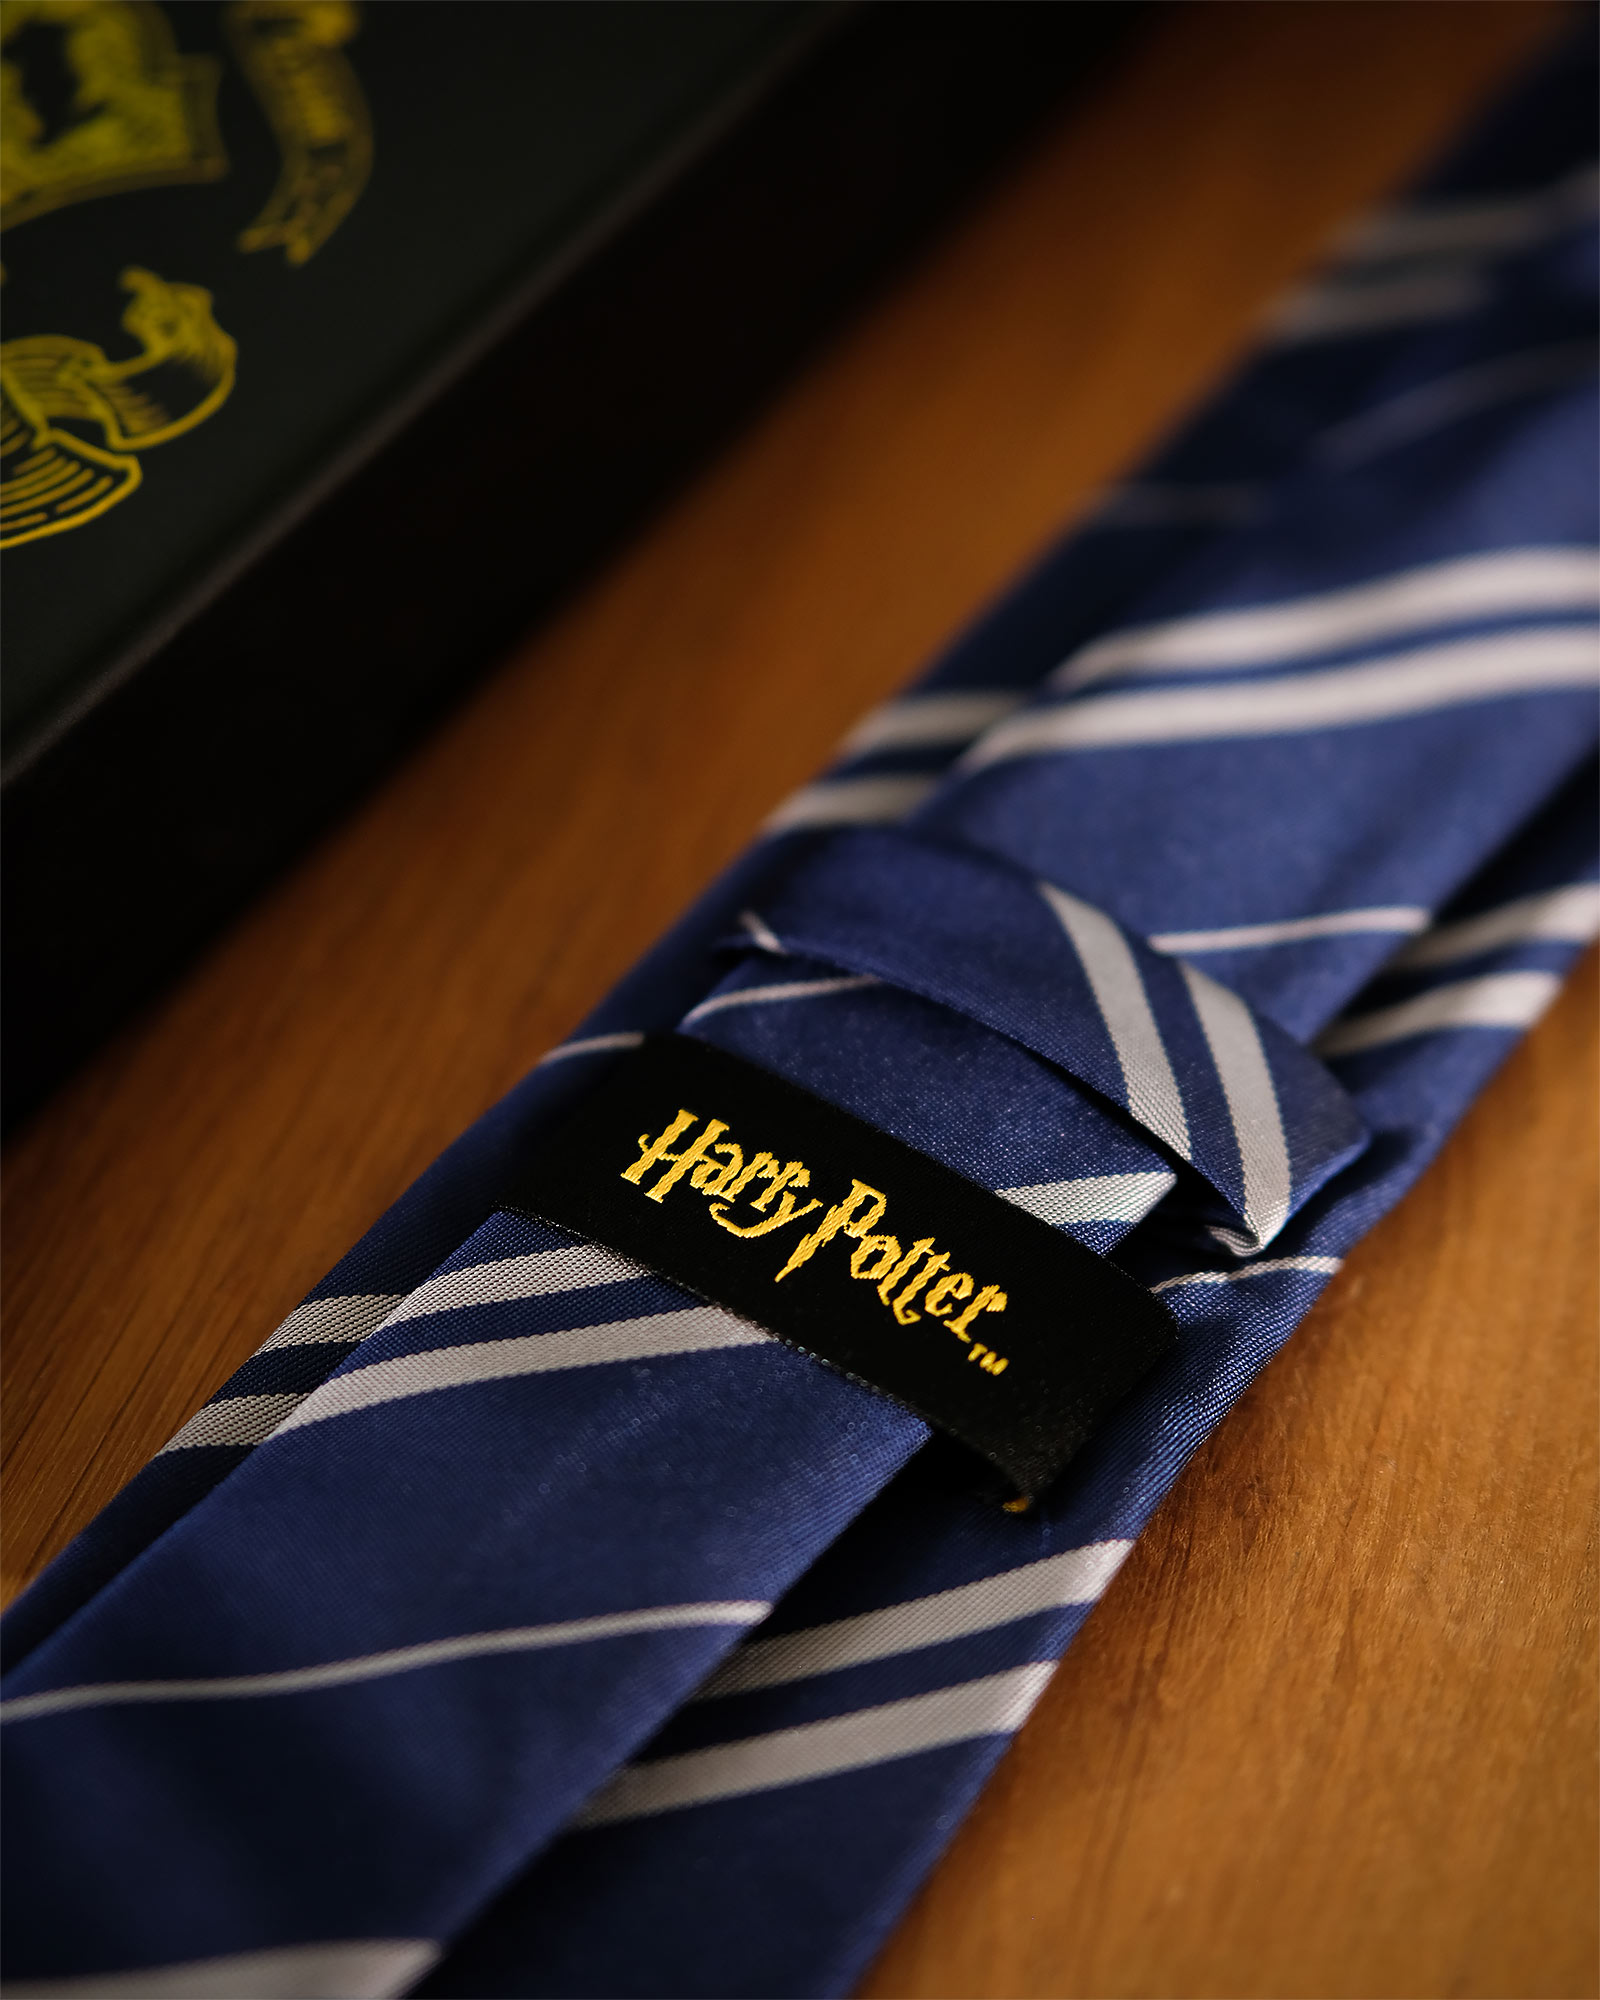 Harry Potter - Ravenclaw Tie with Gift Box